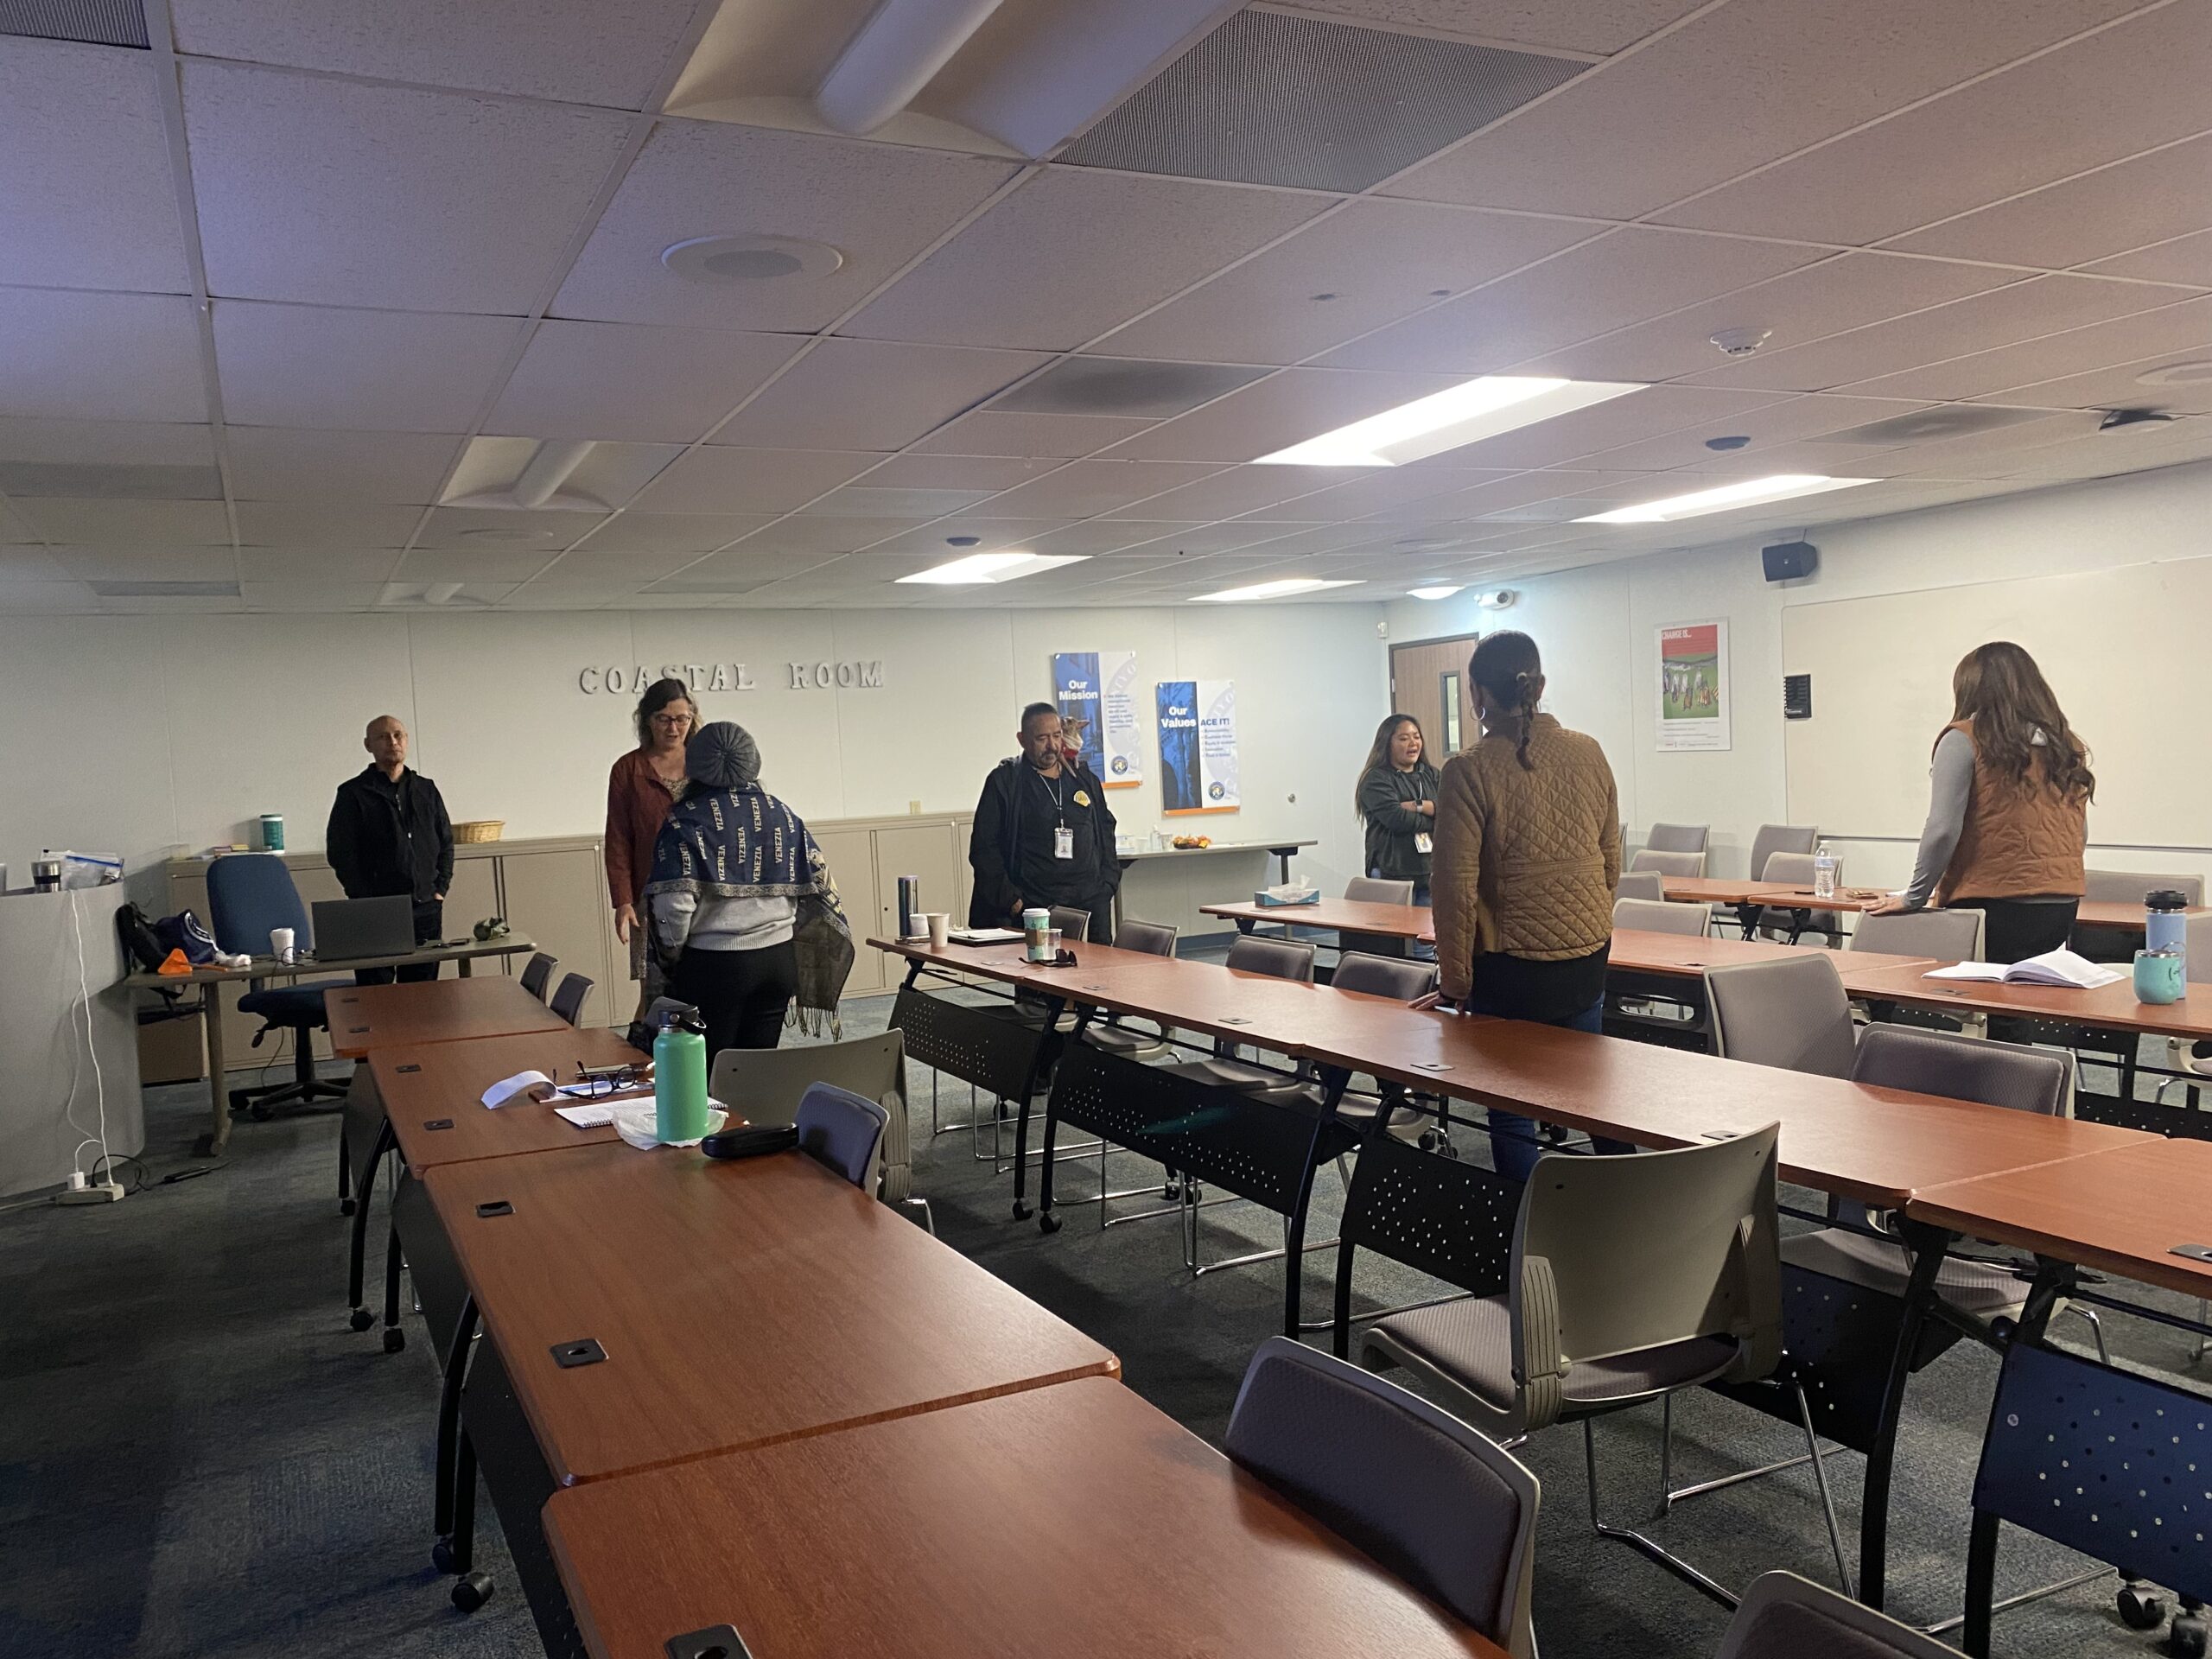 Participants in Painted Brain’s Disability Cultural Competency Development Project pair off for an exercise as they stand between long, brown tables in a brightly lit conference room.